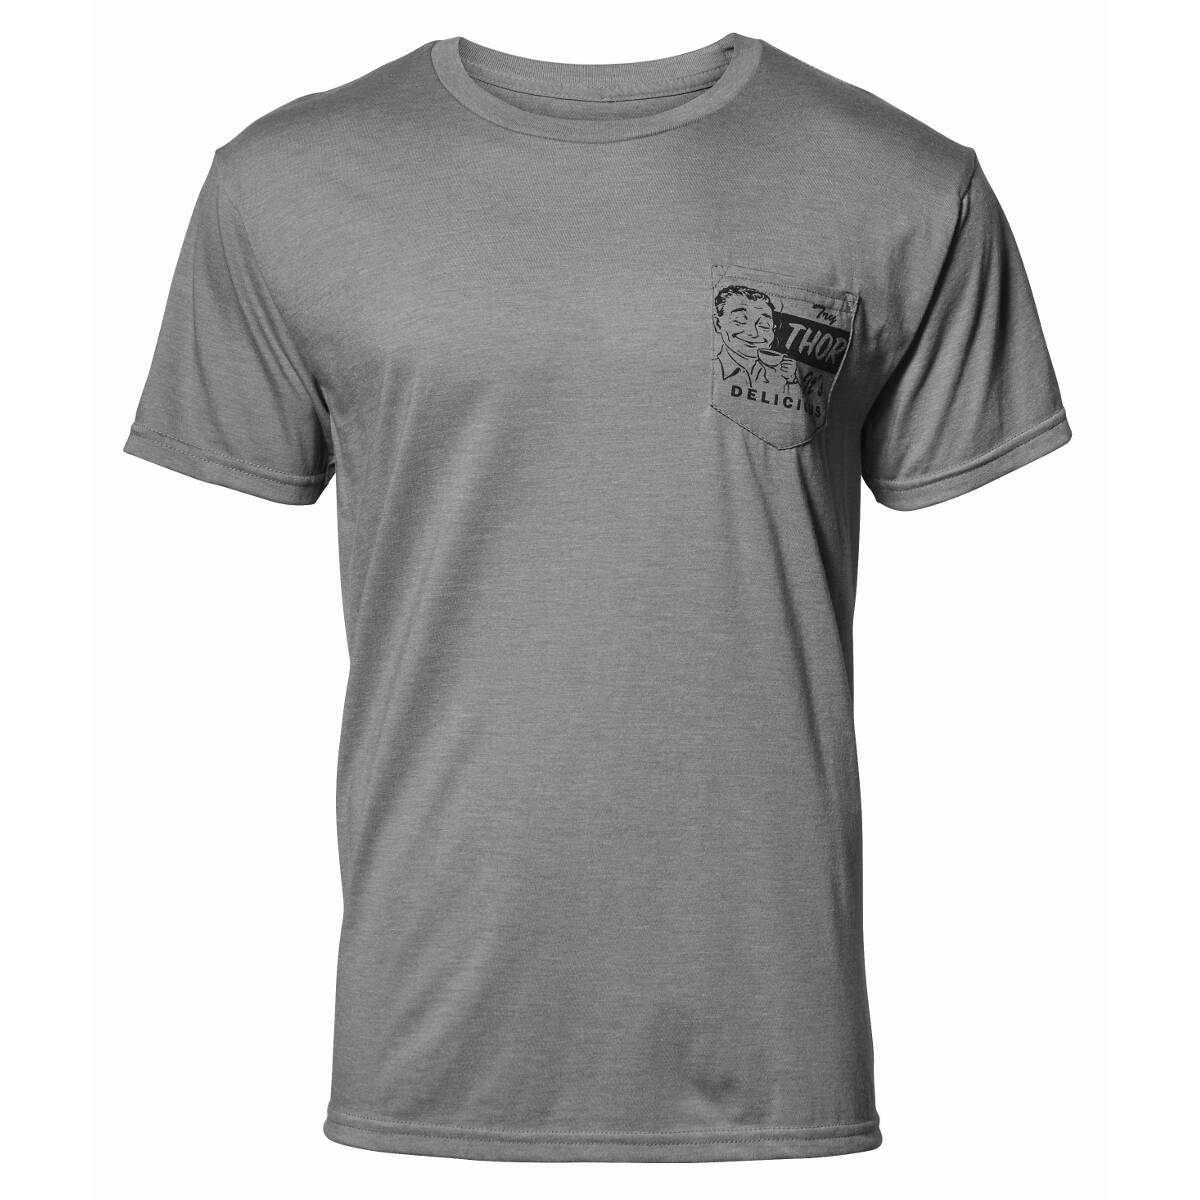 Thor T-Shirt Delicious Grey Heather